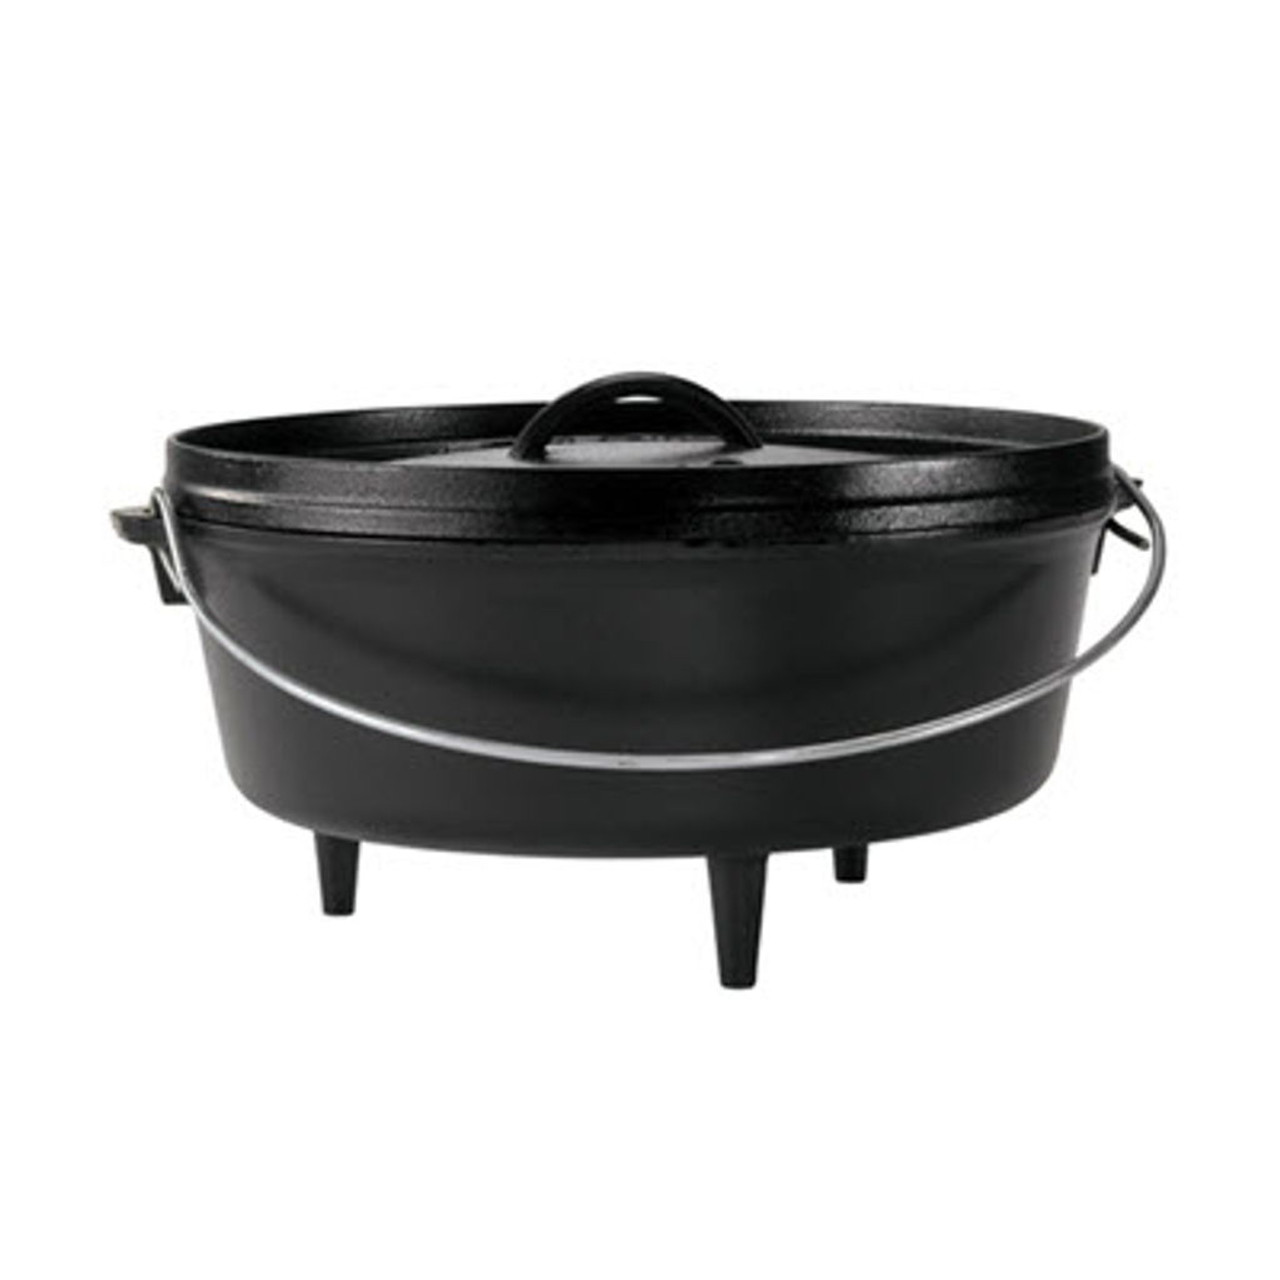 Lodge Camp Dutch Oven Cooking Table